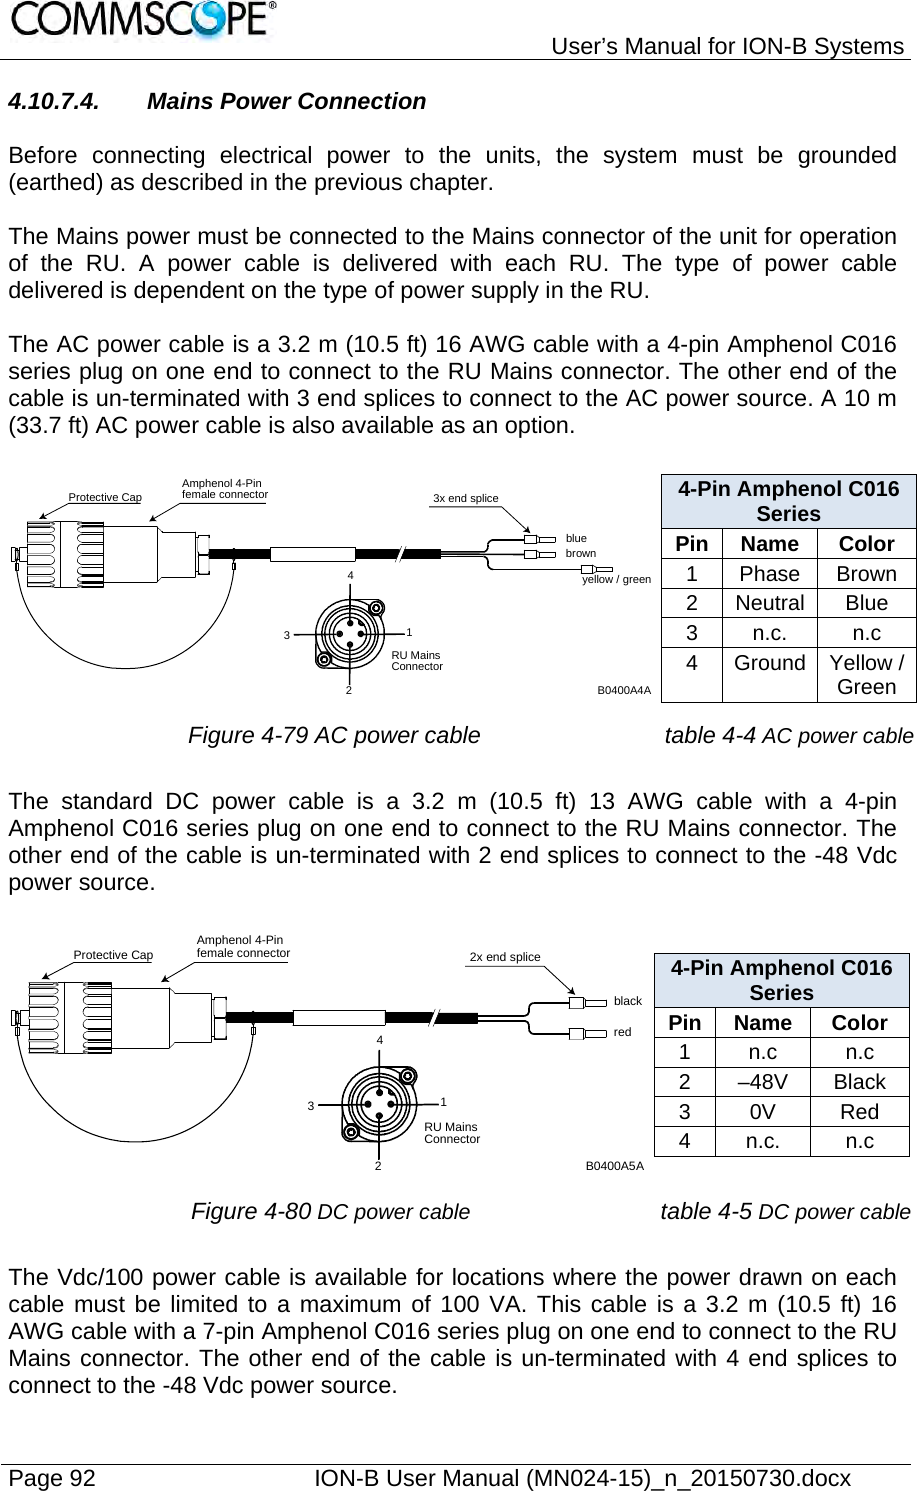   User’s Manual for ION-B Systems Page 92    ION-B User Manual (MN024-15)_n_20150730.docx  4.10.7.4.  Mains Power Connection  Before connecting electrical power to the units, the system must be grounded (earthed) as described in the previous chapter.  The Mains power must be connected to the Mains connector of the unit for operation of the RU. A power cable is delivered with each RU. The type of power cable delivered is dependent on the type of power supply in the RU.  The AC power cable is a 3.2 m (10.5 ft) 16 AWG cable with a 4-pin Amphenol C016 series plug on one end to connect to the RU Mains connector. The other end of the cable is un-terminated with 3 end splices to connect to the AC power source. A 10 m (33.7 ft) AC power cable is also available as an option.  4-Pin Amphenol C016 Series Pin Name  Color 1 Phase Brown 2 Neutral Blue 3 n.c.  n.c 4 Ground Yellow / Green  Figure 4-79 AC power cable table 4-4 AC power cable The standard DC power cable is a 3.2 m (10.5 ft) 13 AWG cable with a 4-pin Amphenol C016 series plug on one end to connect to the RU Mains connector. The other end of the cable is un-terminated with 2 end splices to connect to the -48 Vdc power source.  4-Pin Amphenol C016 Series Pin Name  Color 1 n.c  n.c 2 –48V Black 3 0V  Red 4 n.c.  n.c  Figure 4-80 DC power cable table 4-5 DC power cable The Vdc/100 power cable is available for locations where the power drawn on each cable must be limited to a maximum of 100 VA. This cable is a 3.2 m (10.5 ft) 16 AWG cable with a 7-pin Amphenol C016 series plug on one end to connect to the RU Mains connector. The other end of the cable is un-terminated with 4 end splices to connect to the -48 Vdc power source. blueAmphenol 4-Pinfemale connectorProtective Cap 3x end splicebrownyellow / greenB0400A4ARU MainsConnector4321blackAmphenol 4-Pinfemale connectorProtective Cap 2x end spliceredB0400A5ARU MainsConnector4321